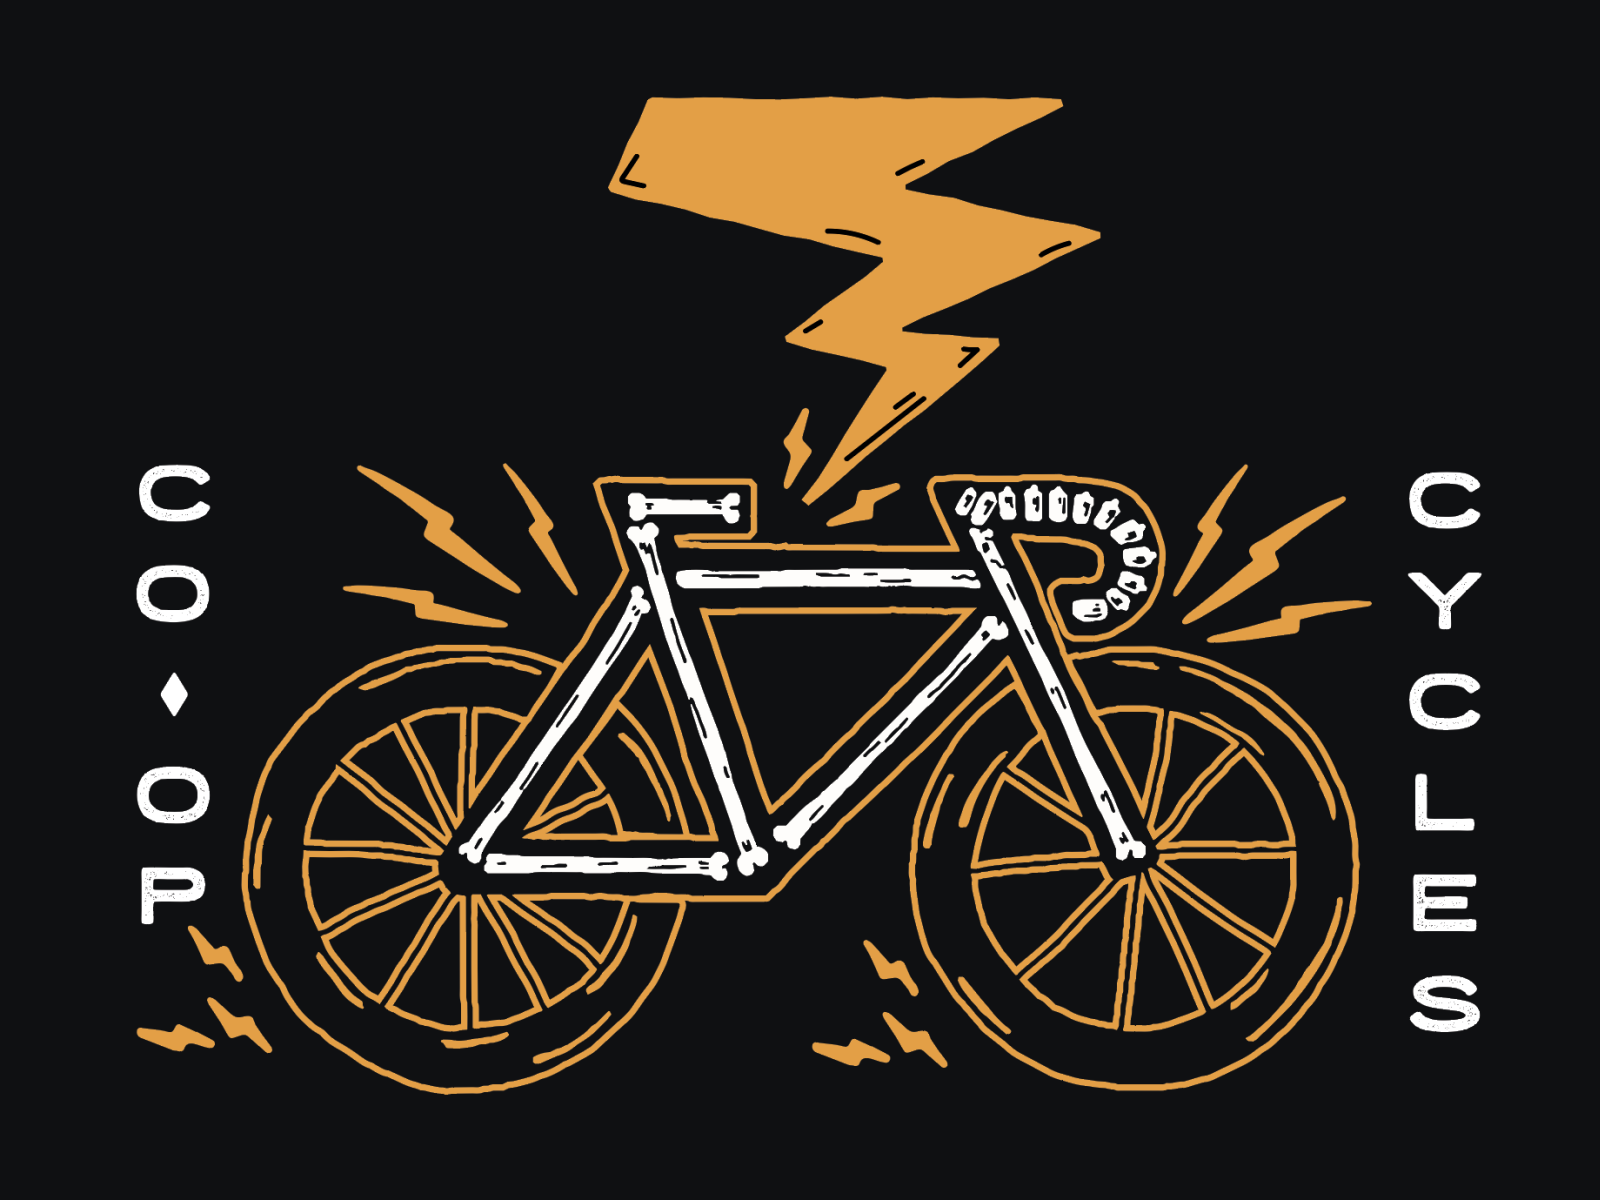 Ebikes are the future bicycle bike co-op cycle ebike electric electricity graphic illustration outside